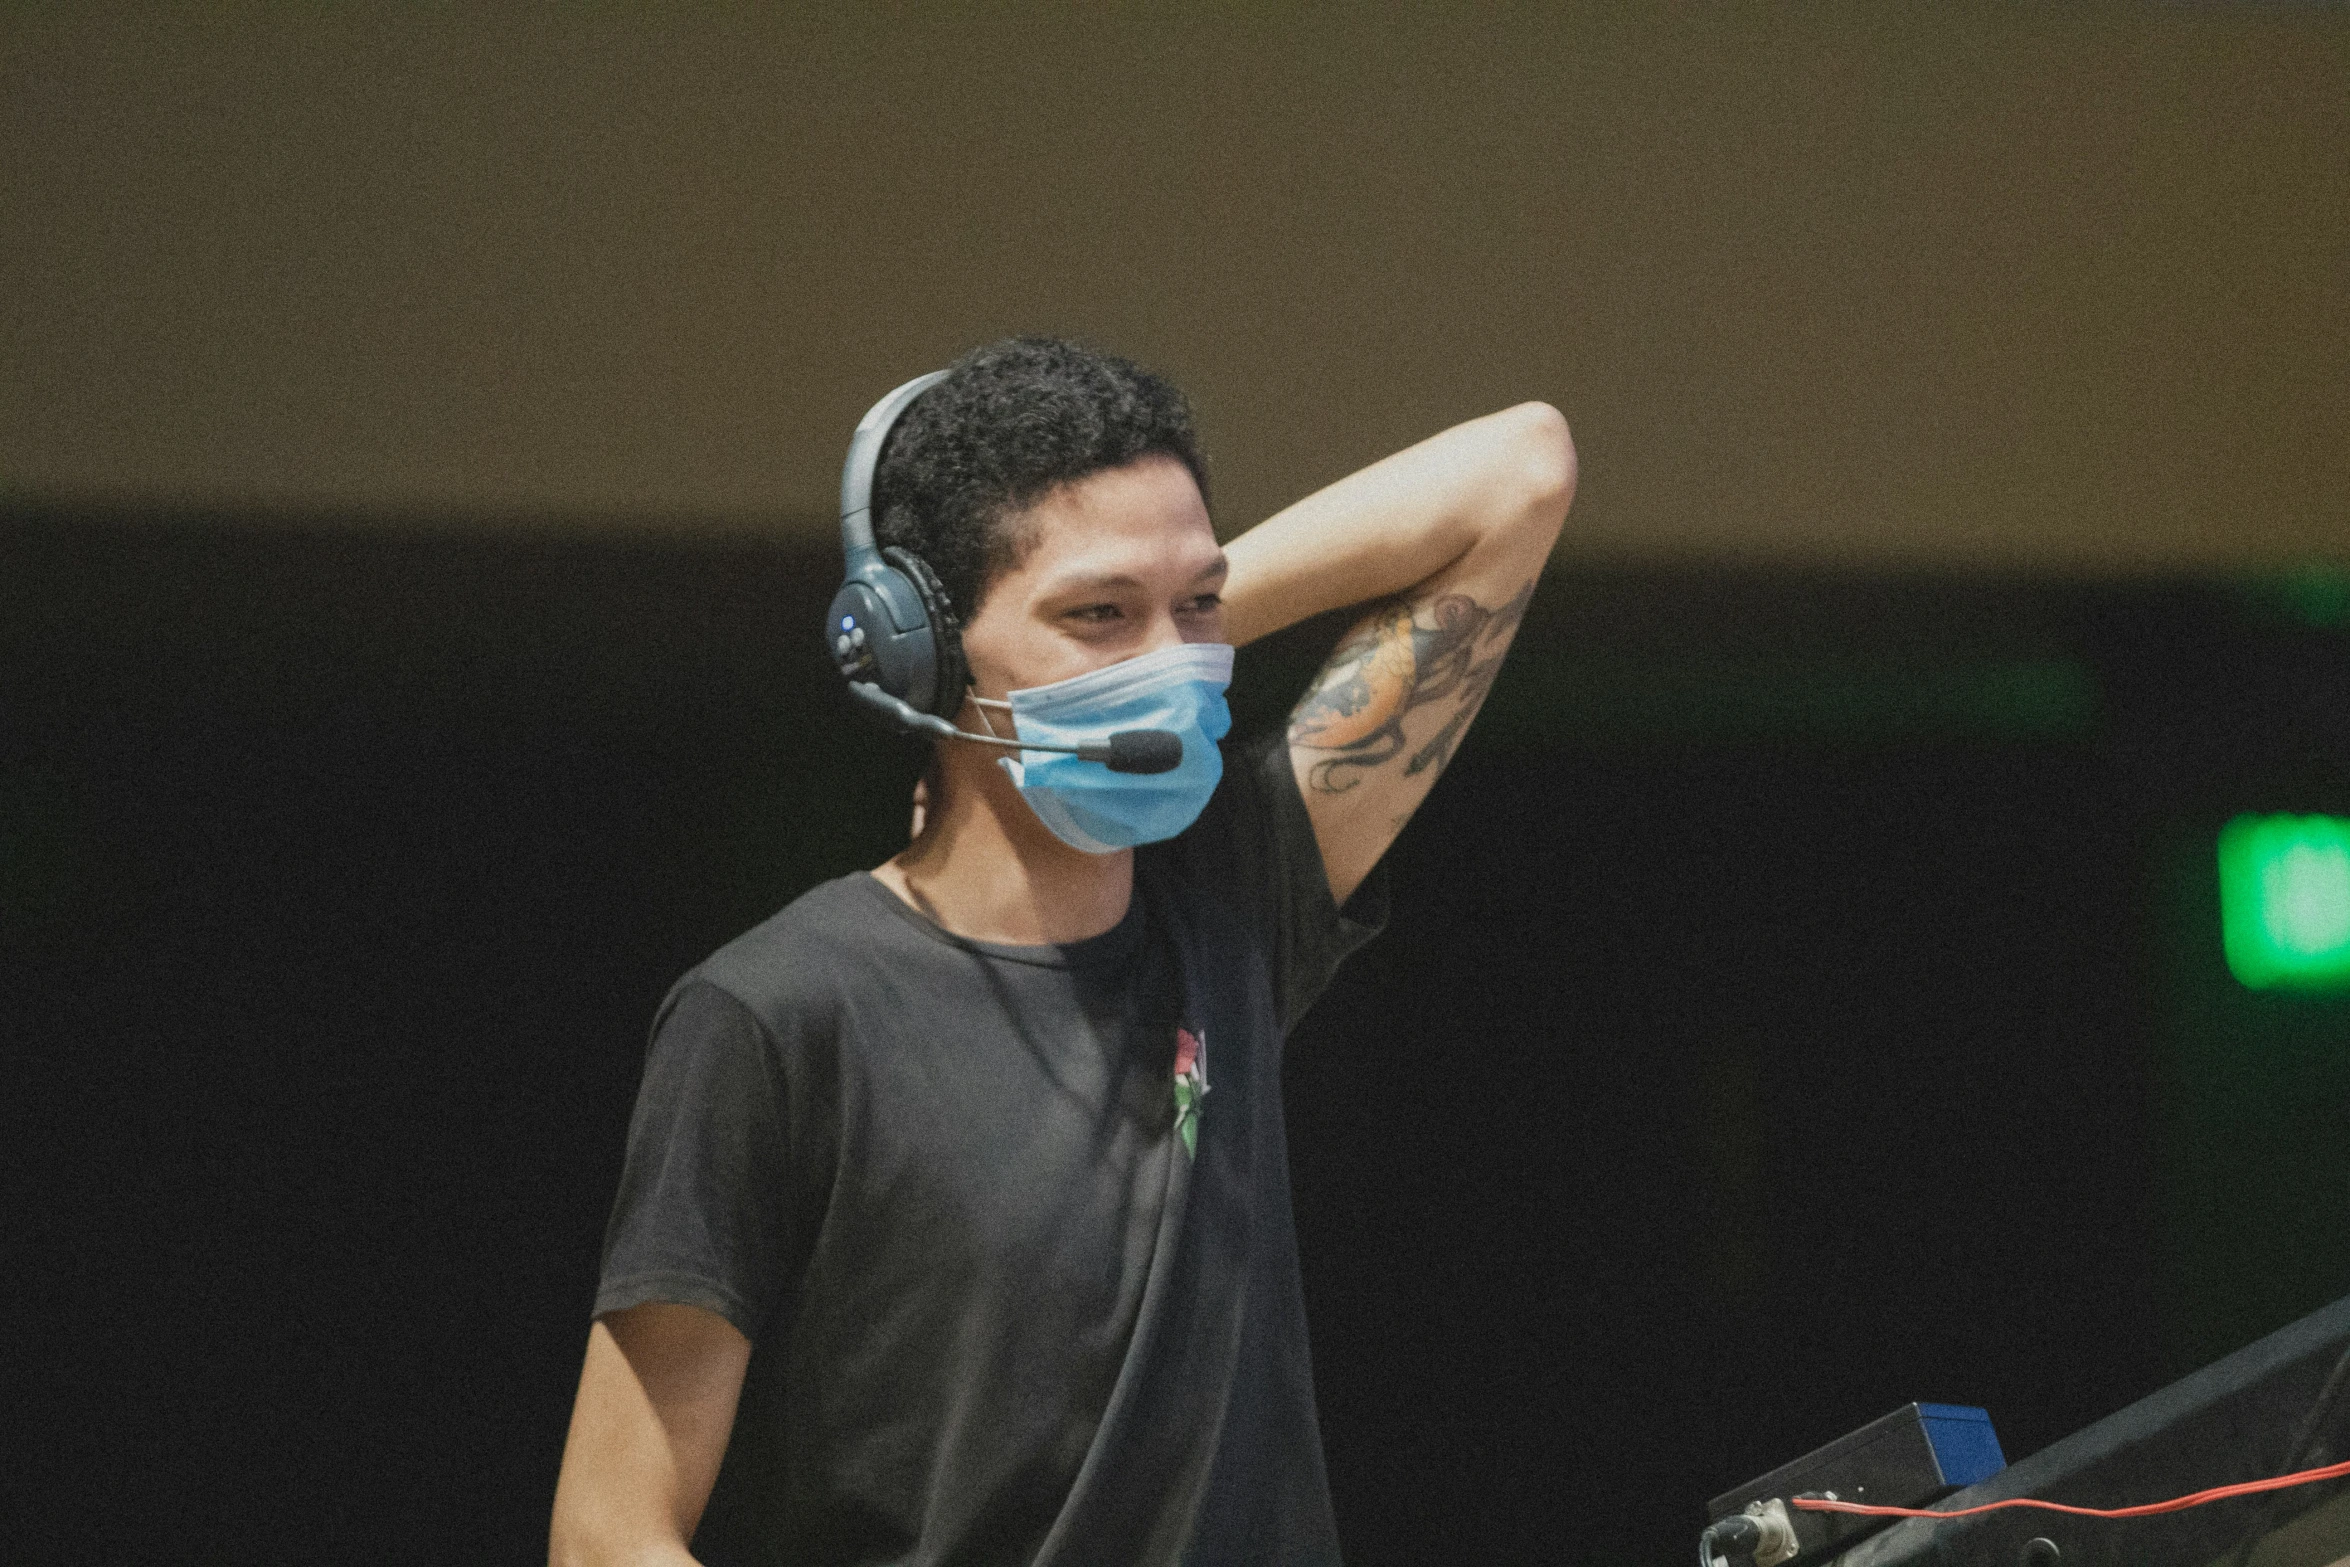 a man wearing a face mask and playing dj equipment